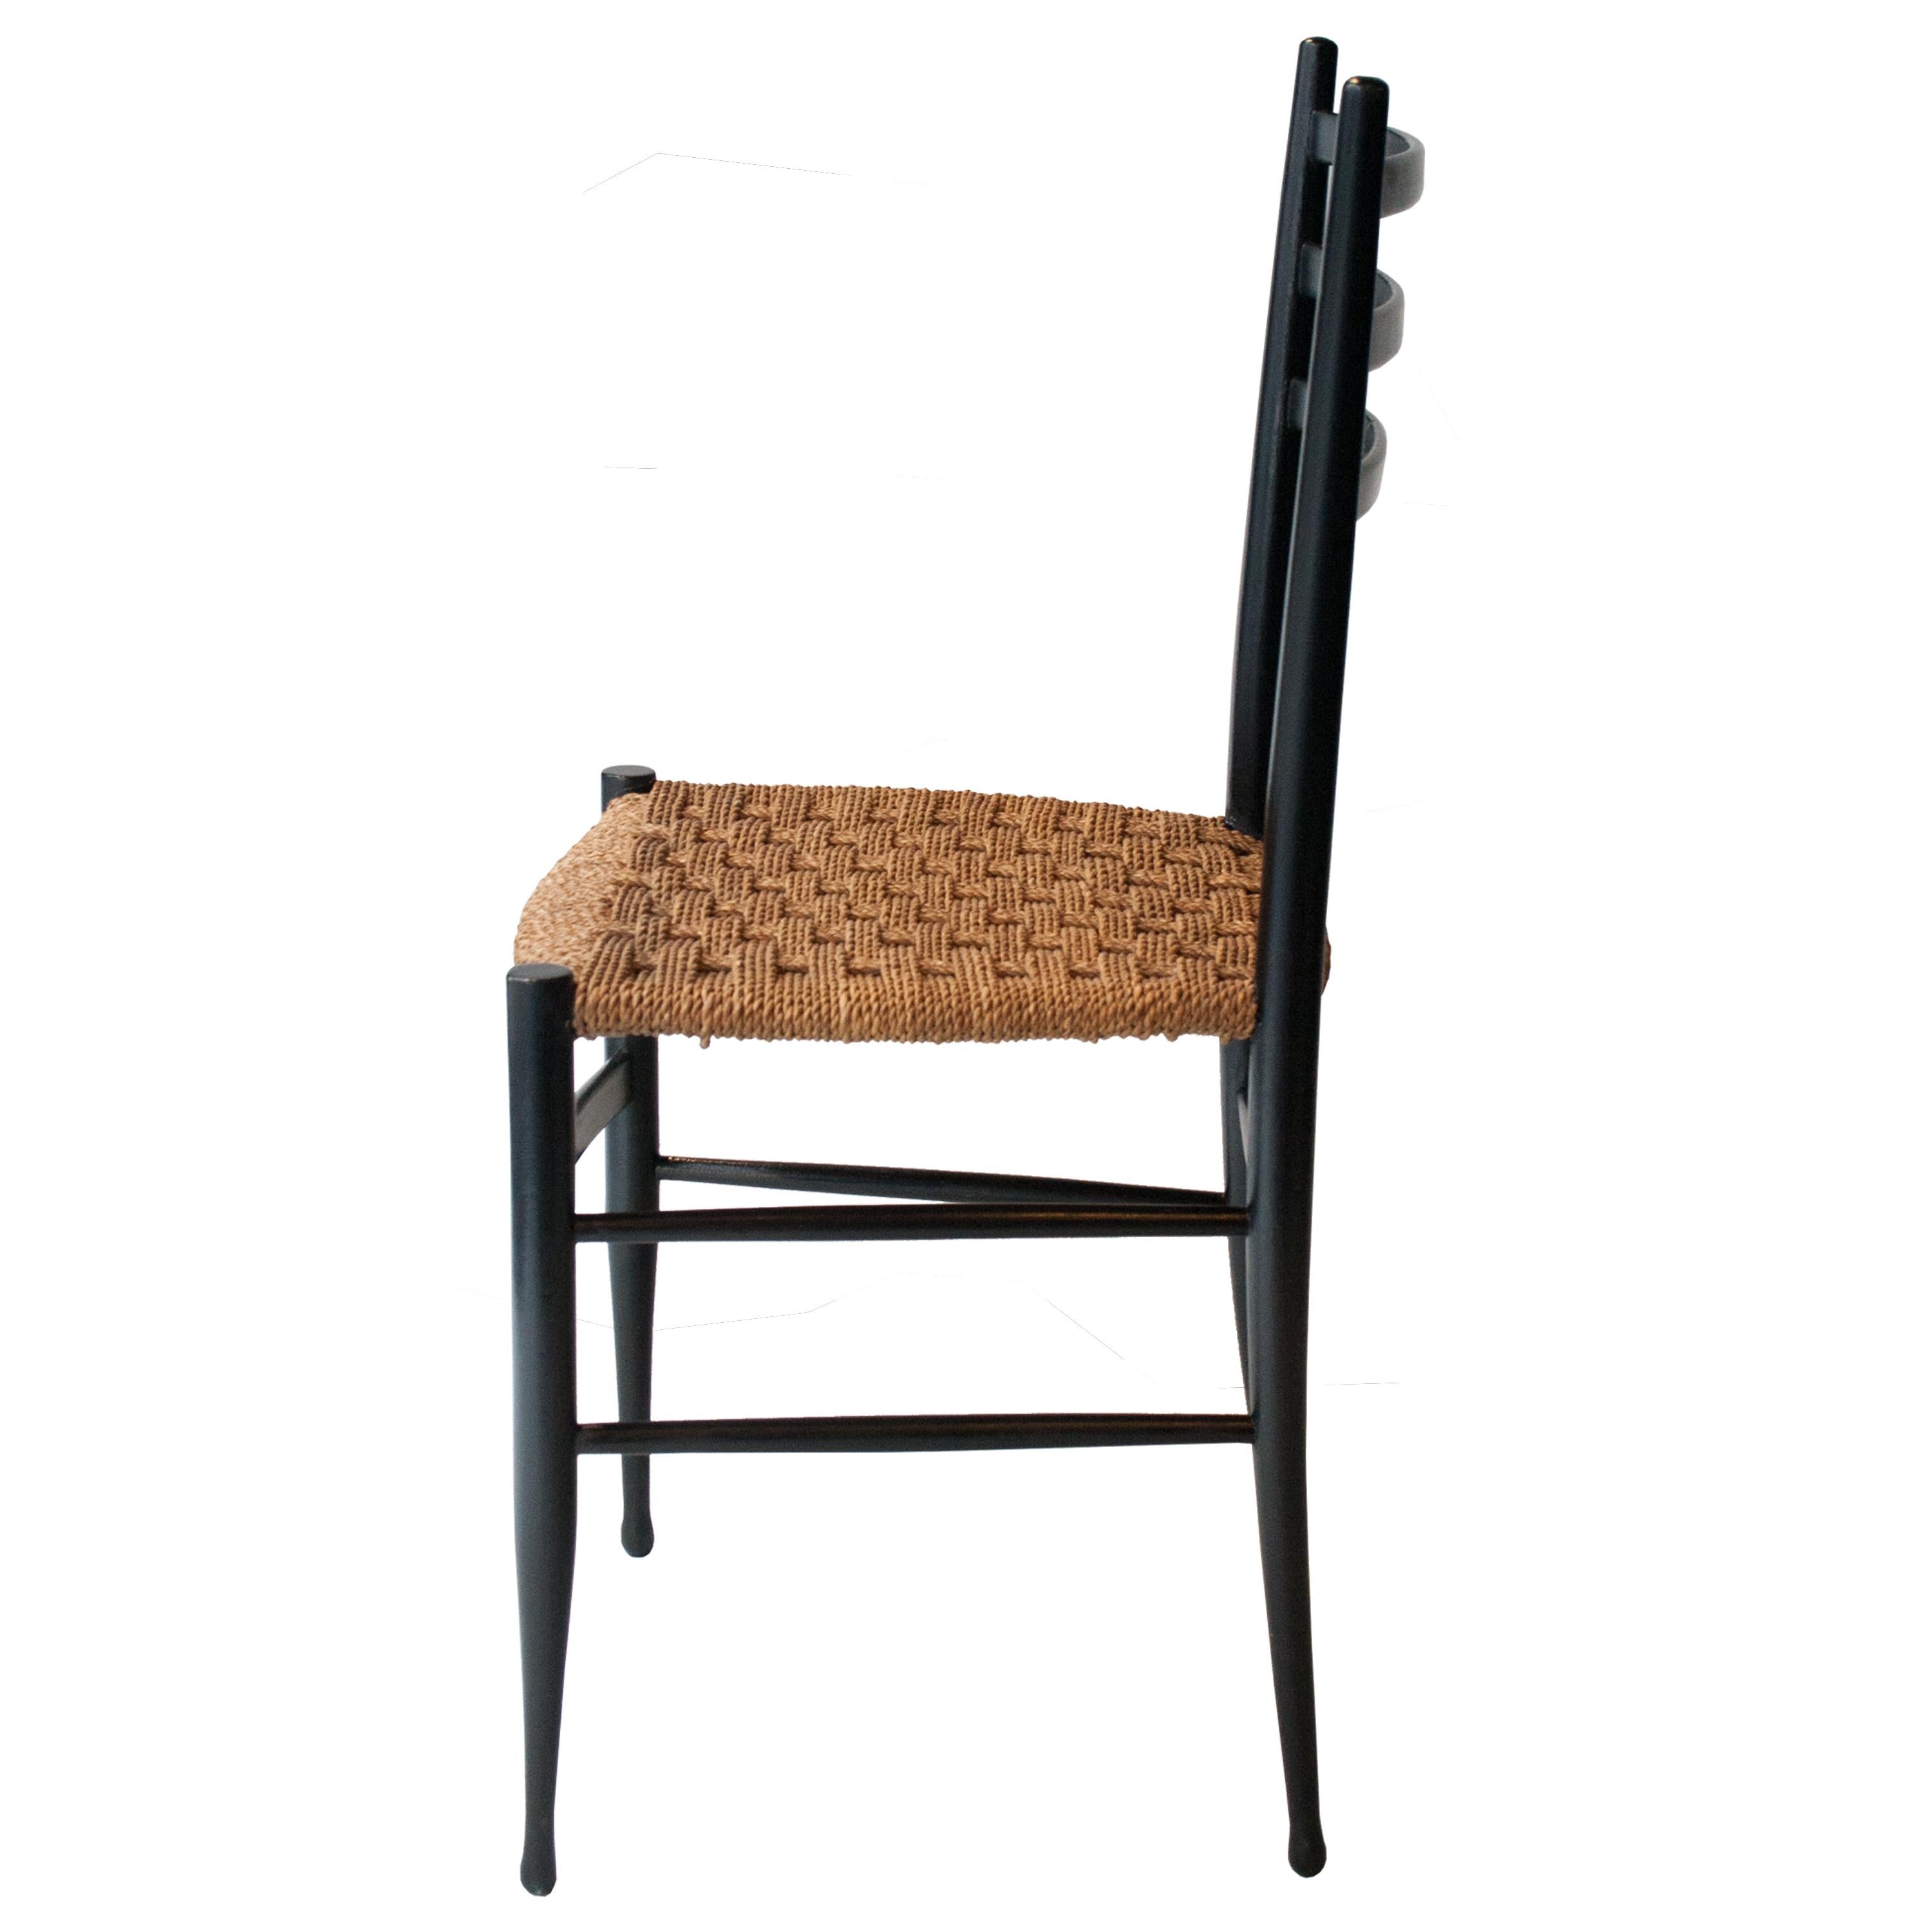 Italian Midcentury Attributed Gio Ponti Black Lacquered Wood Chairs, Italy, 1950 For Sale